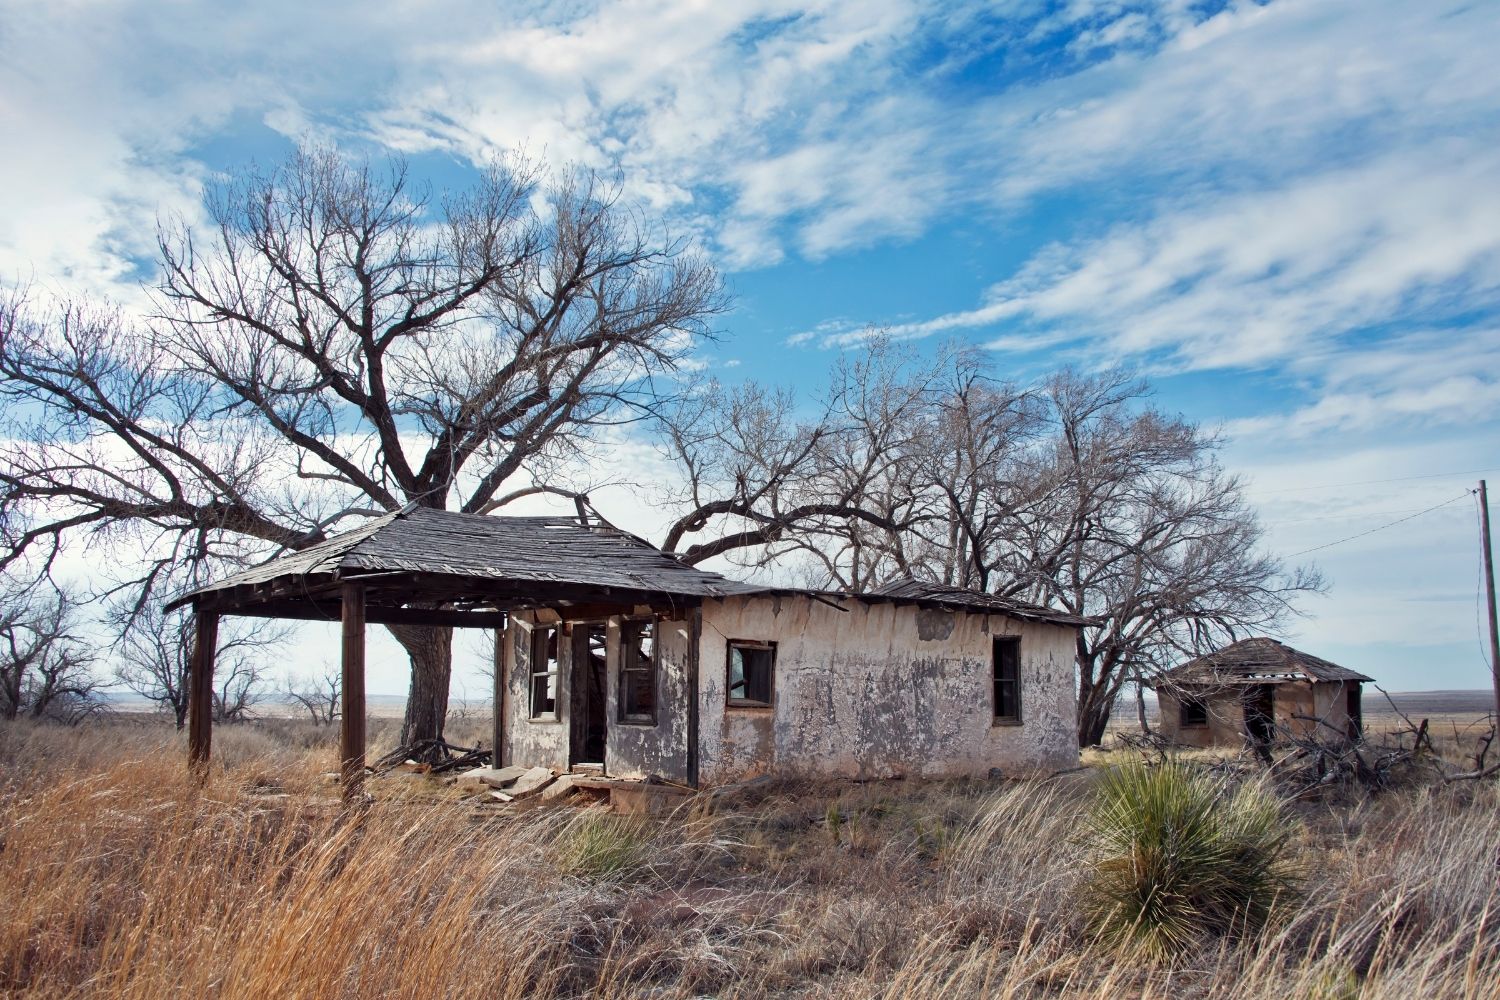 ghost town tours in texas